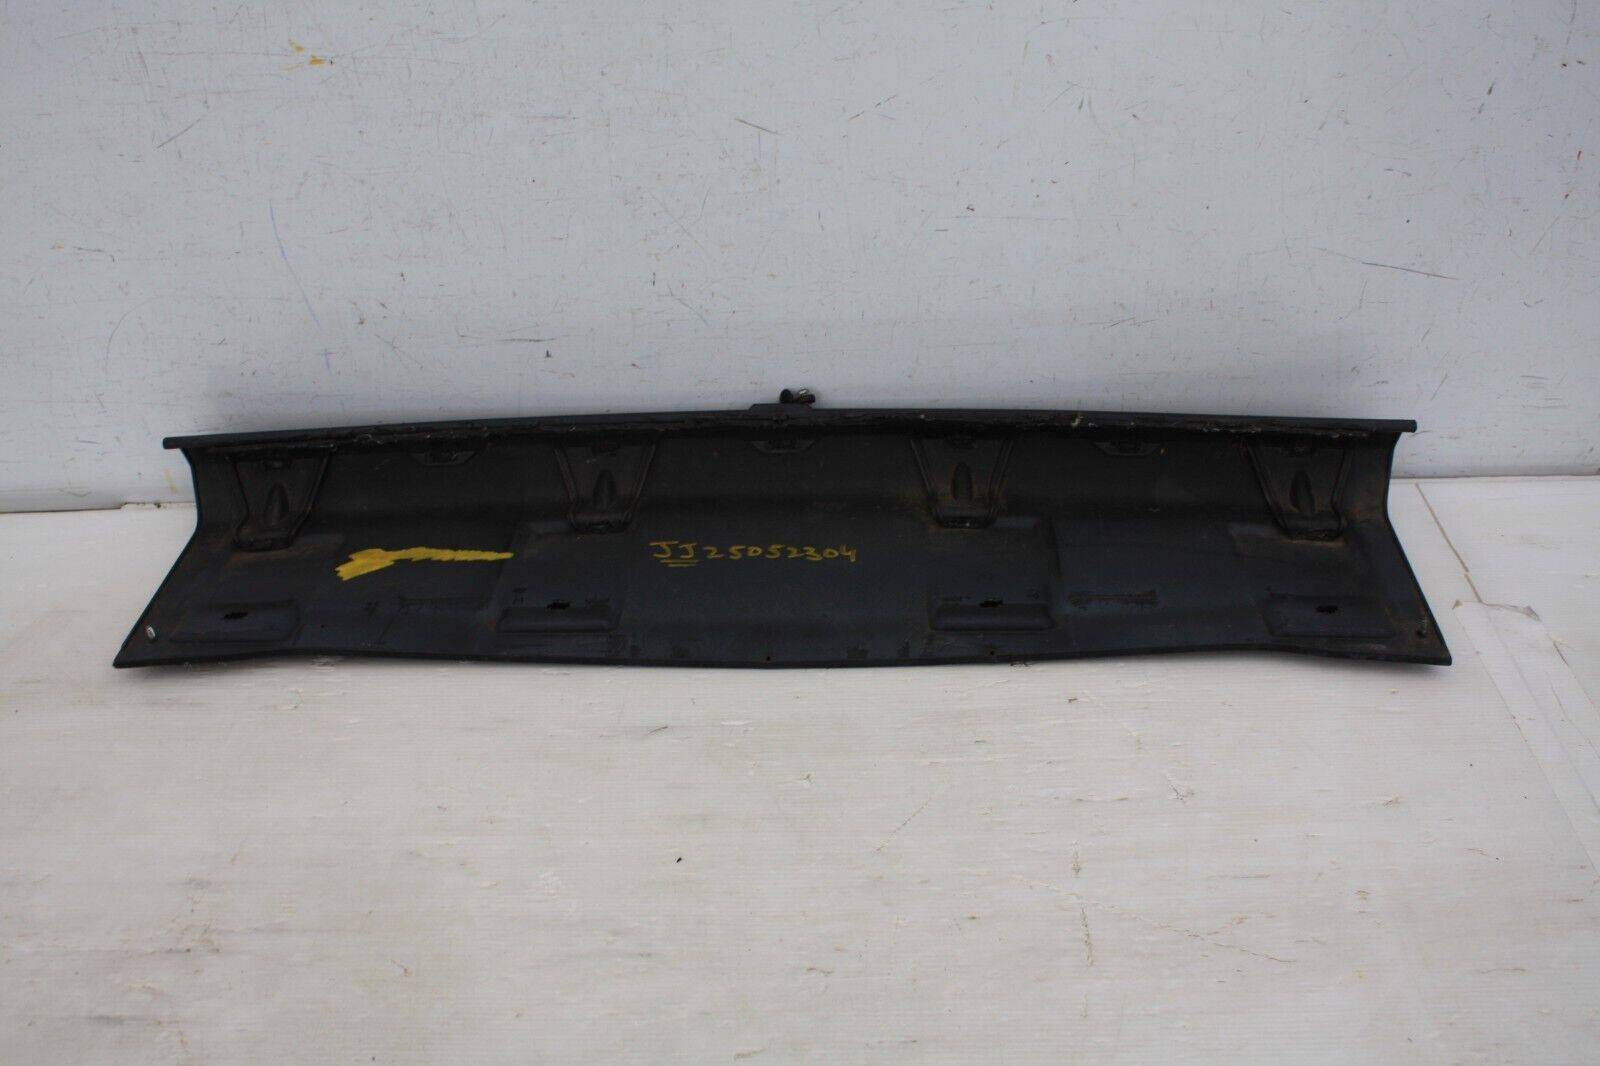 Range-Rover-Autobiography-Front-Bumper-Lower-Section-BH4M-17F021-A-SEE-PICS-175744651531-17